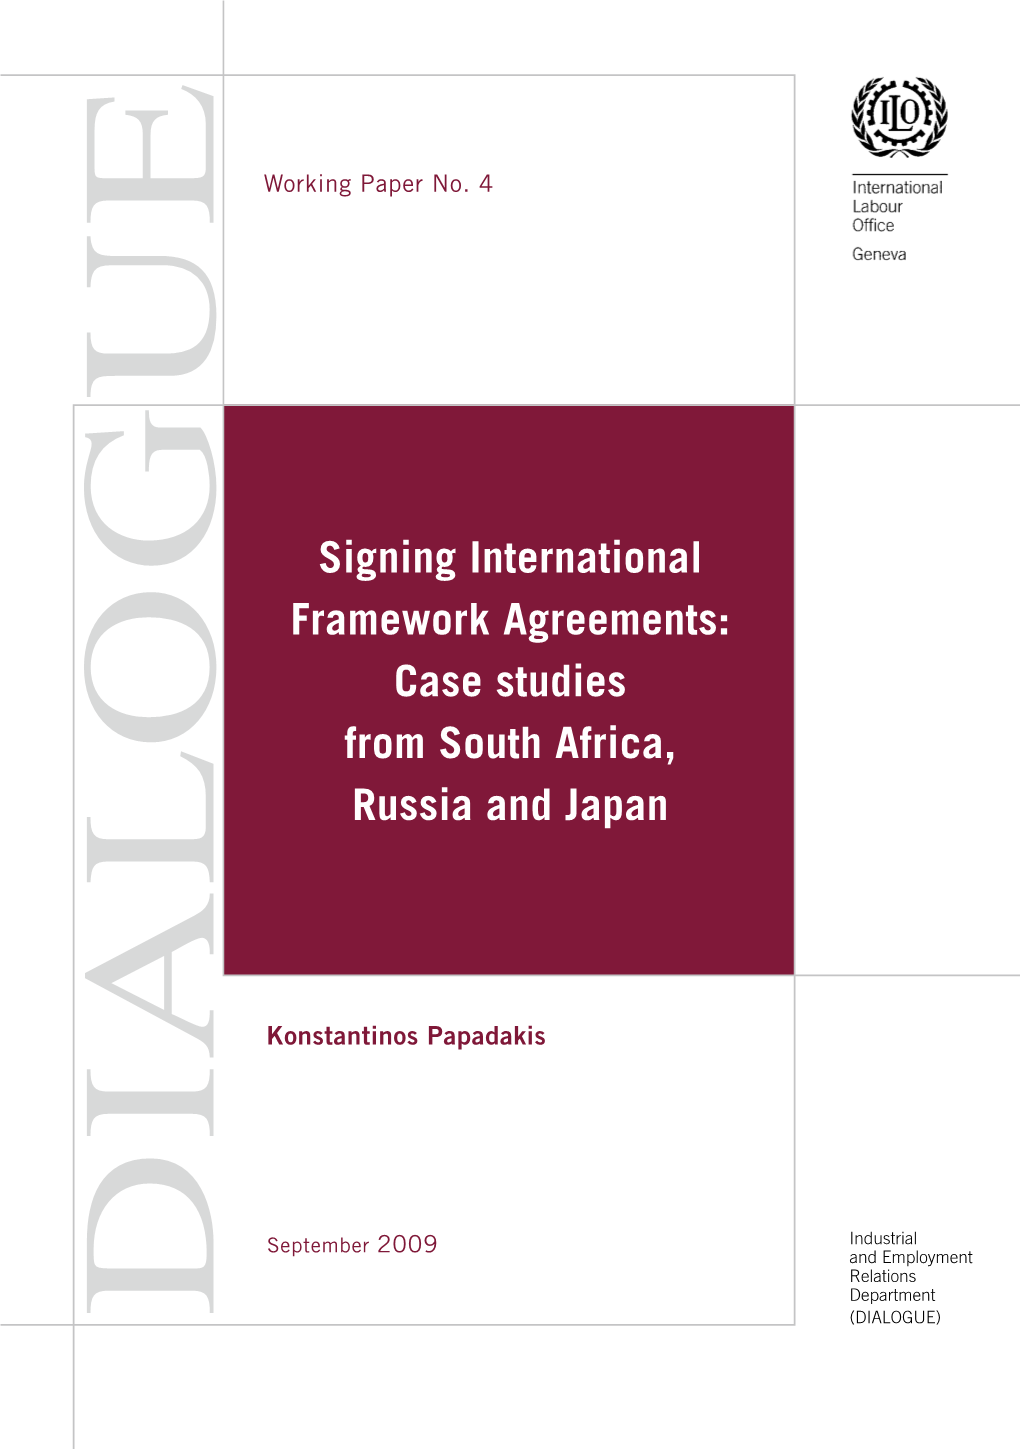 Case Studies from South Africa, Russia and Japanpdf